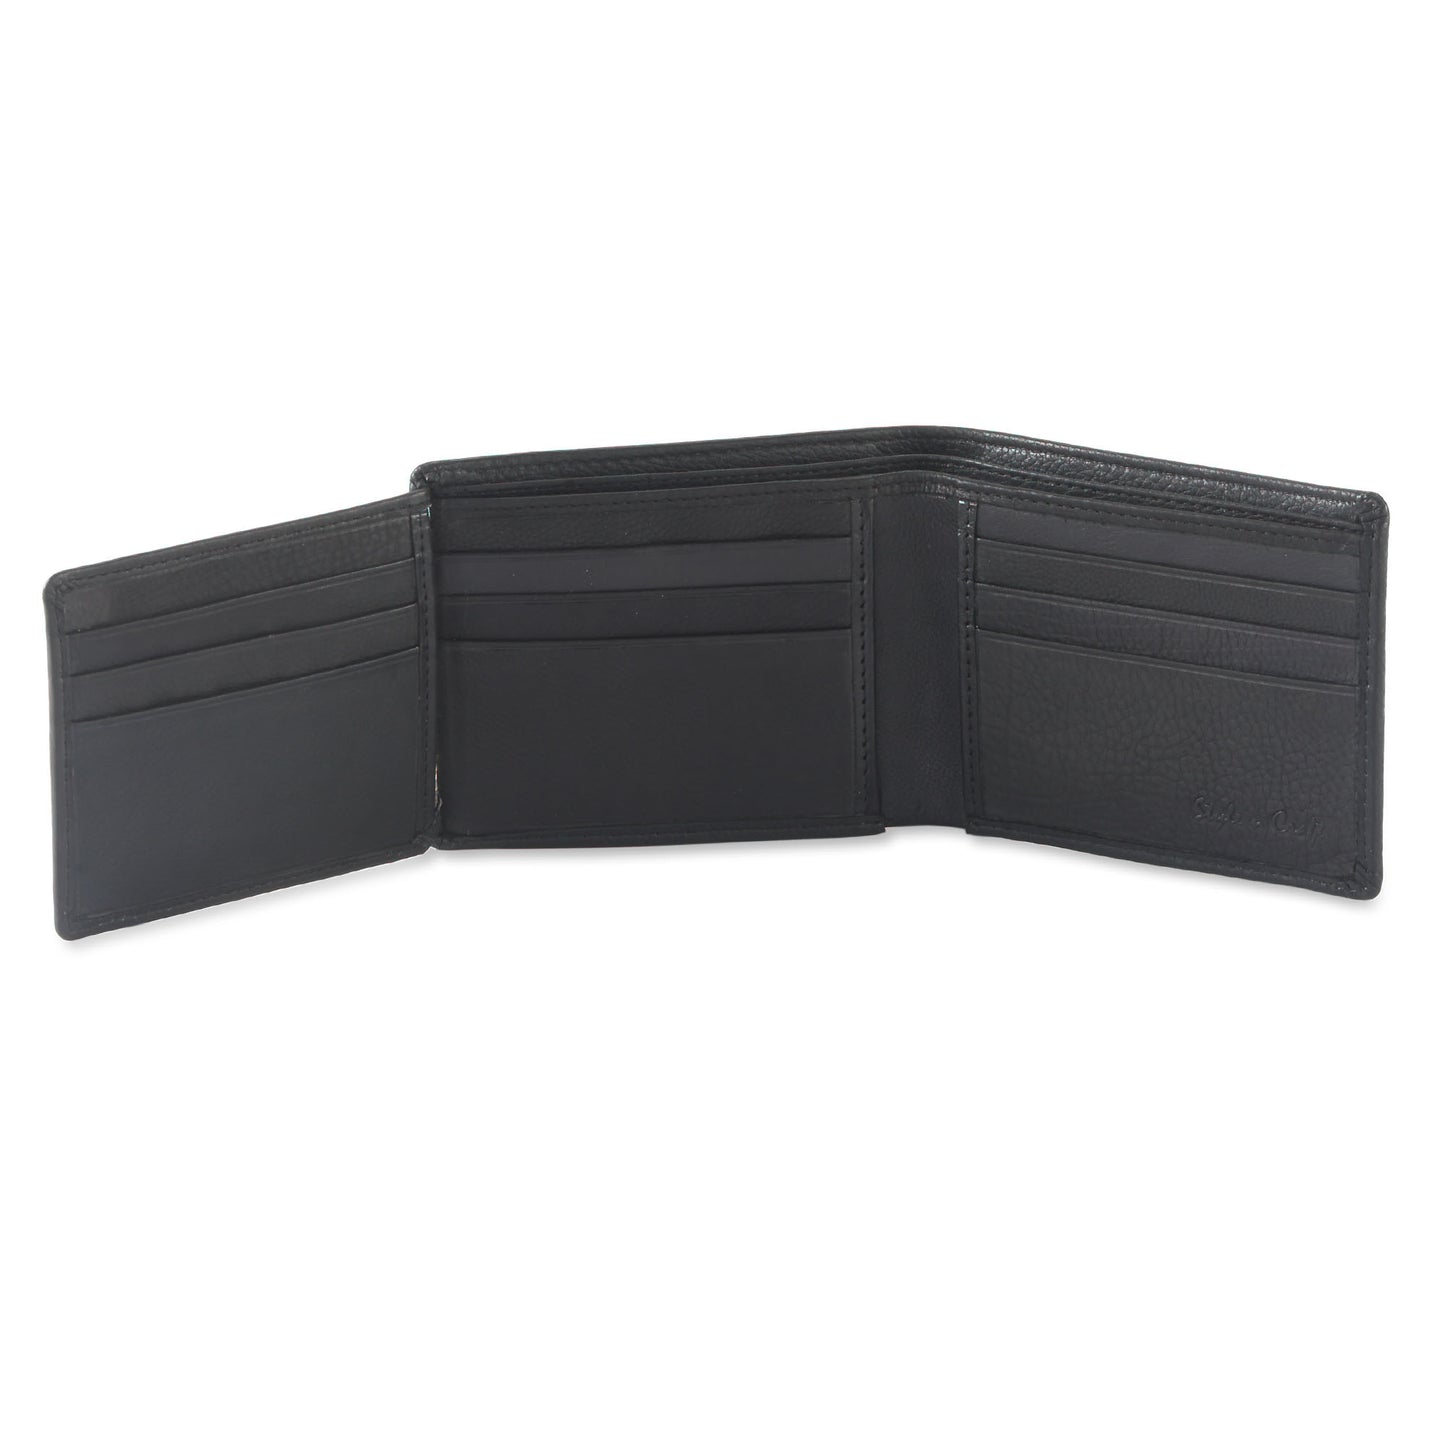 Style n Craft 200166 bifold wallet with side flap in black color leather - open view 2